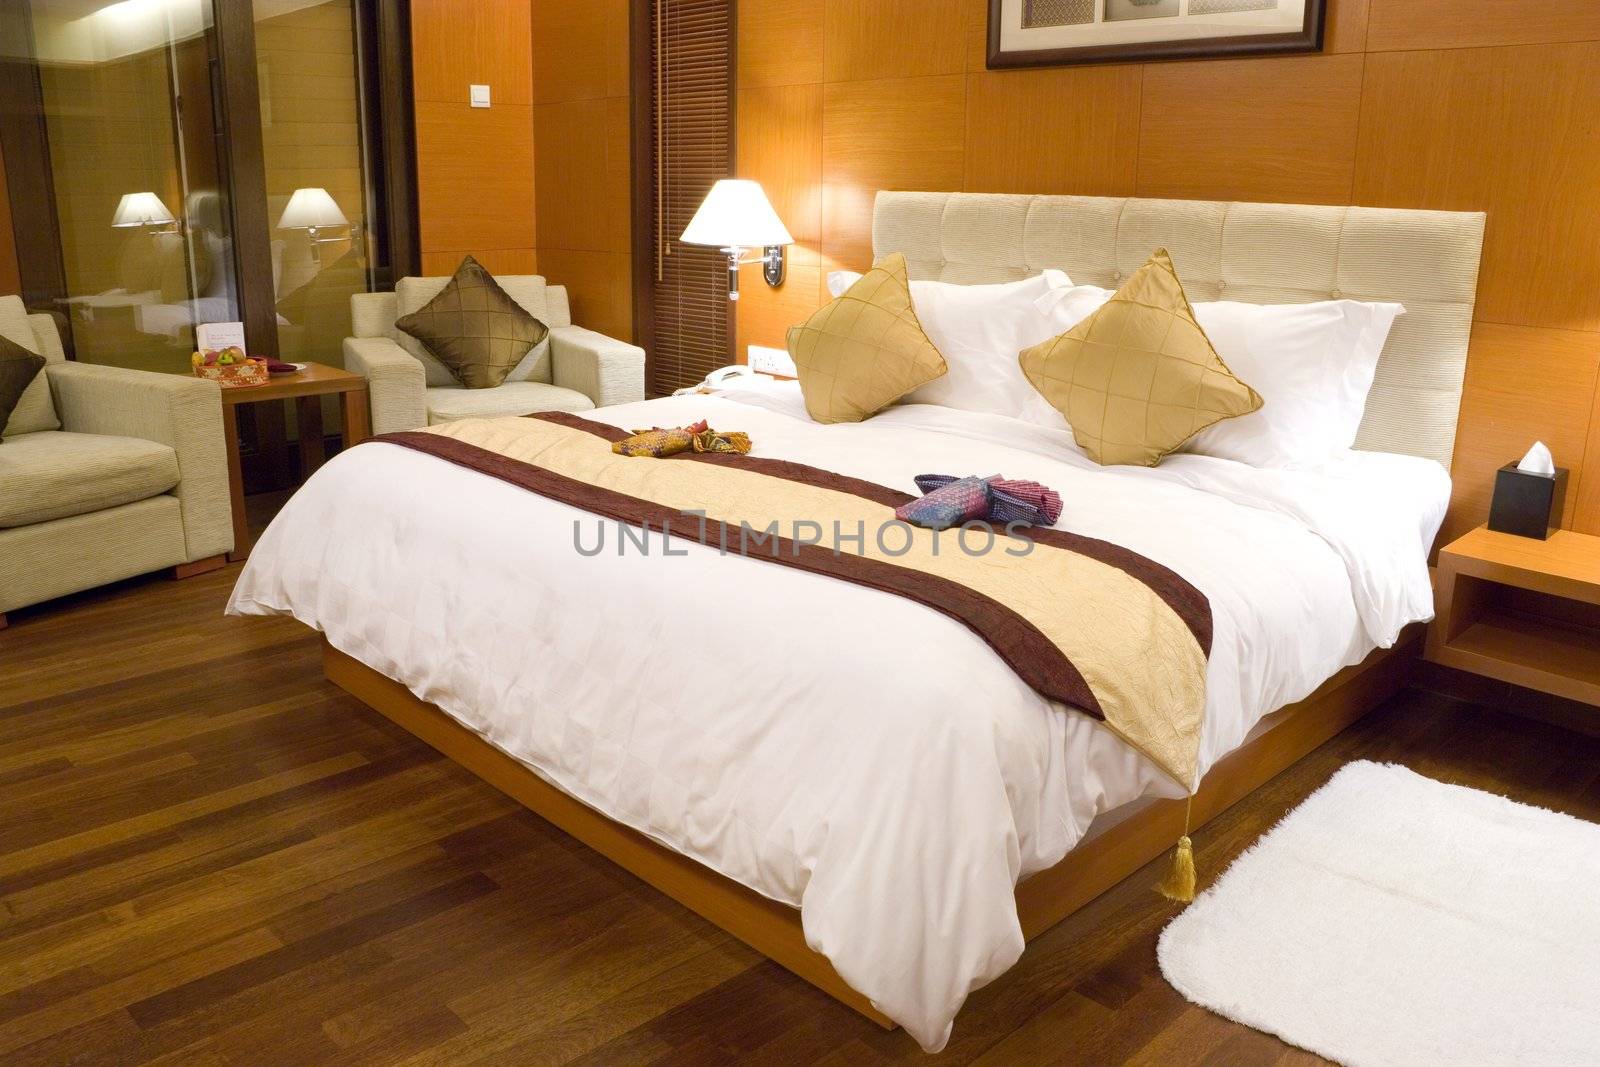 Image of a comfortable looking hotel bedroom.